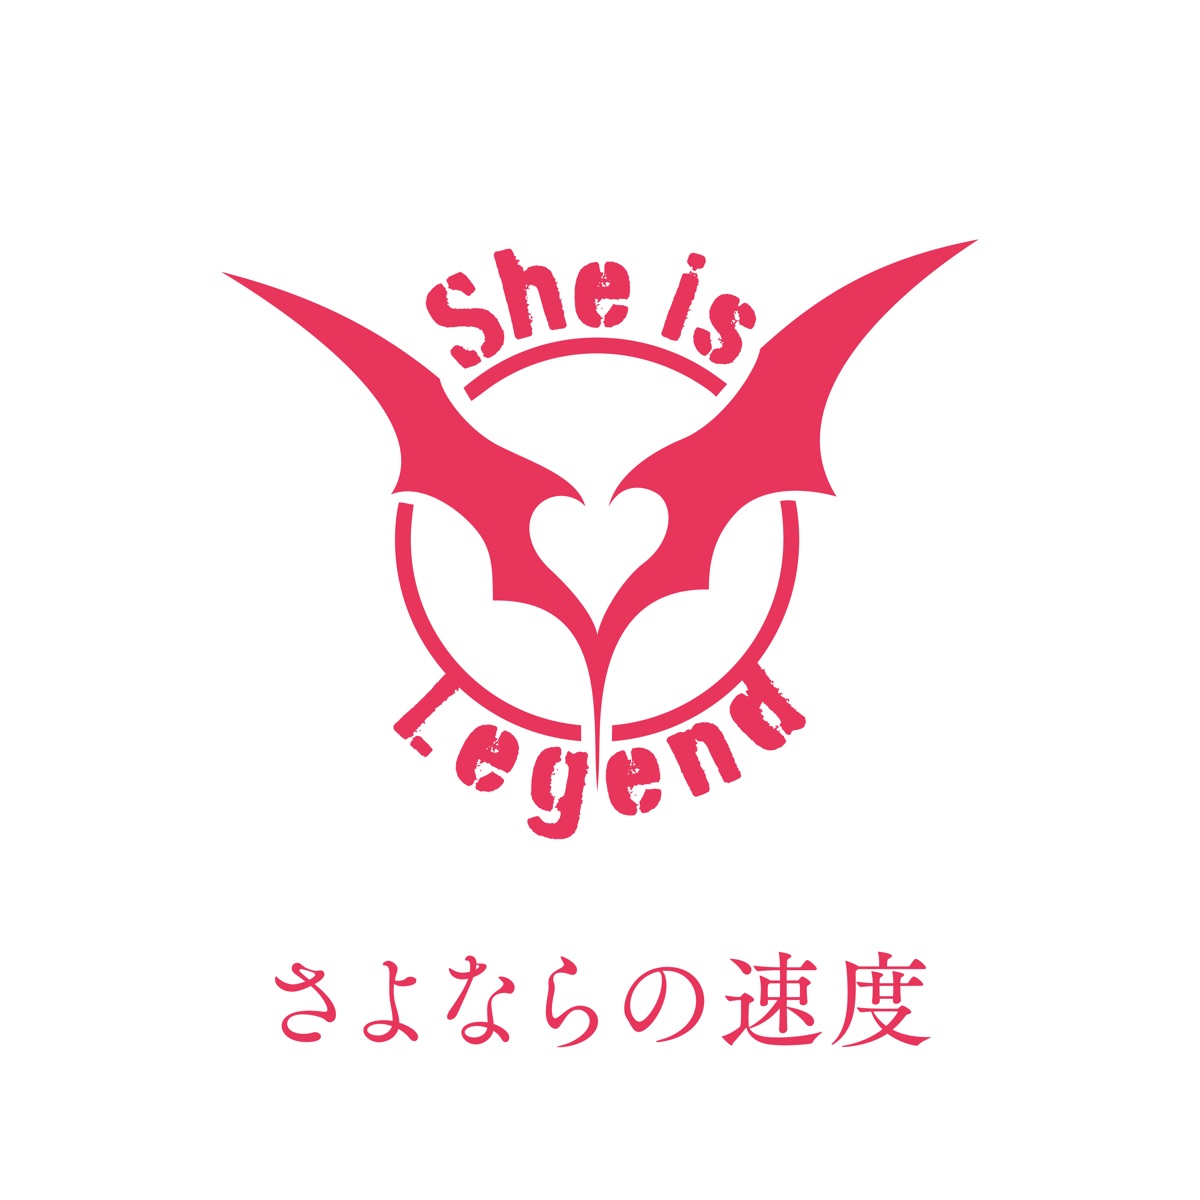 Cover art for『She is Legend - さよならの速度』from the release『Sayonara no Sokudo